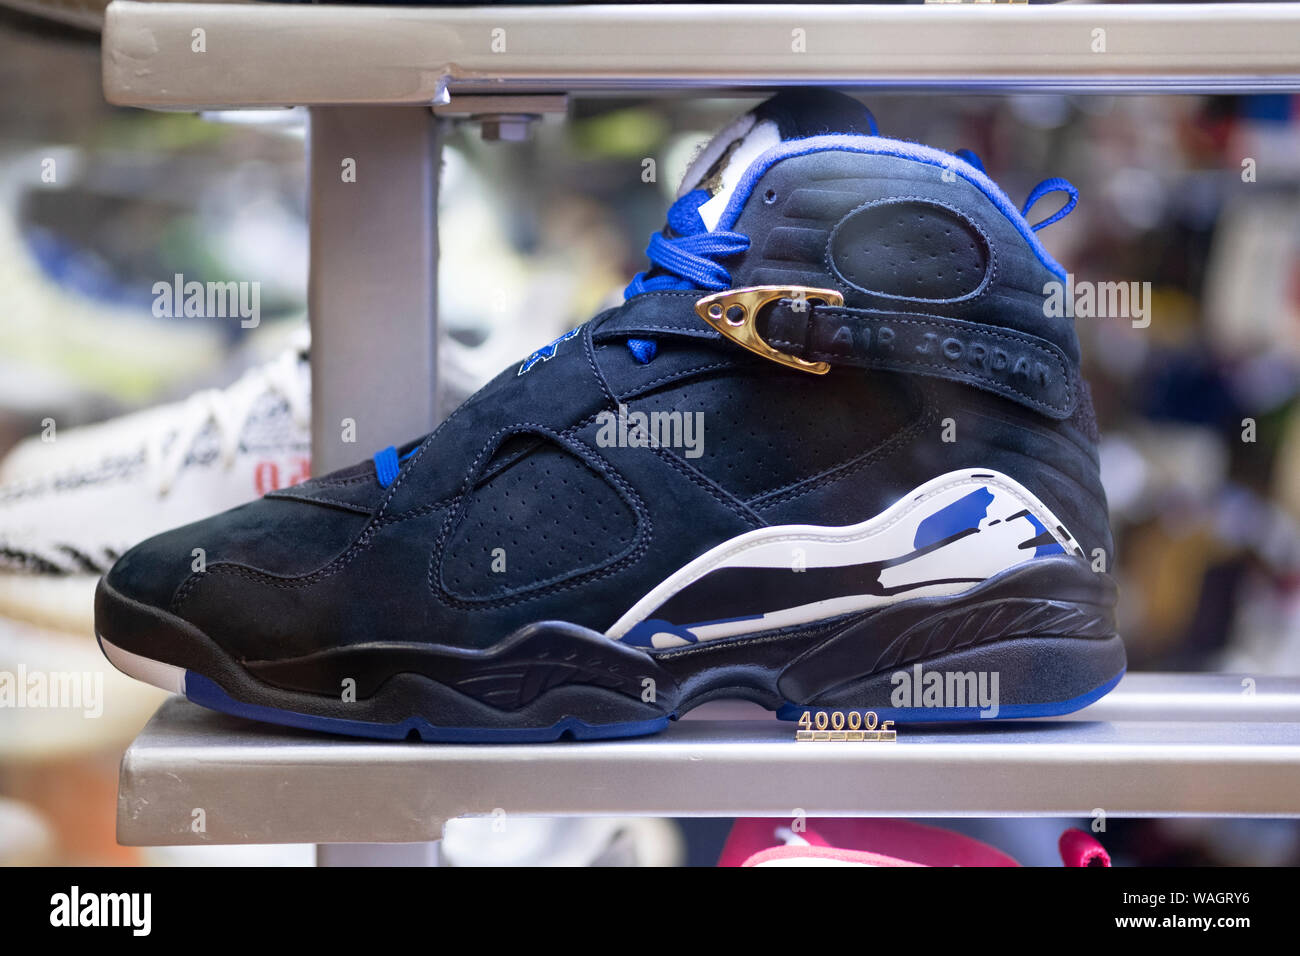 FORTY THOUSAND BUCKS. A very rare and expensive unreleased pair of Air Jordan sneakers for sale at the Flight Club in Manhattan for $40,000. Stock Photo